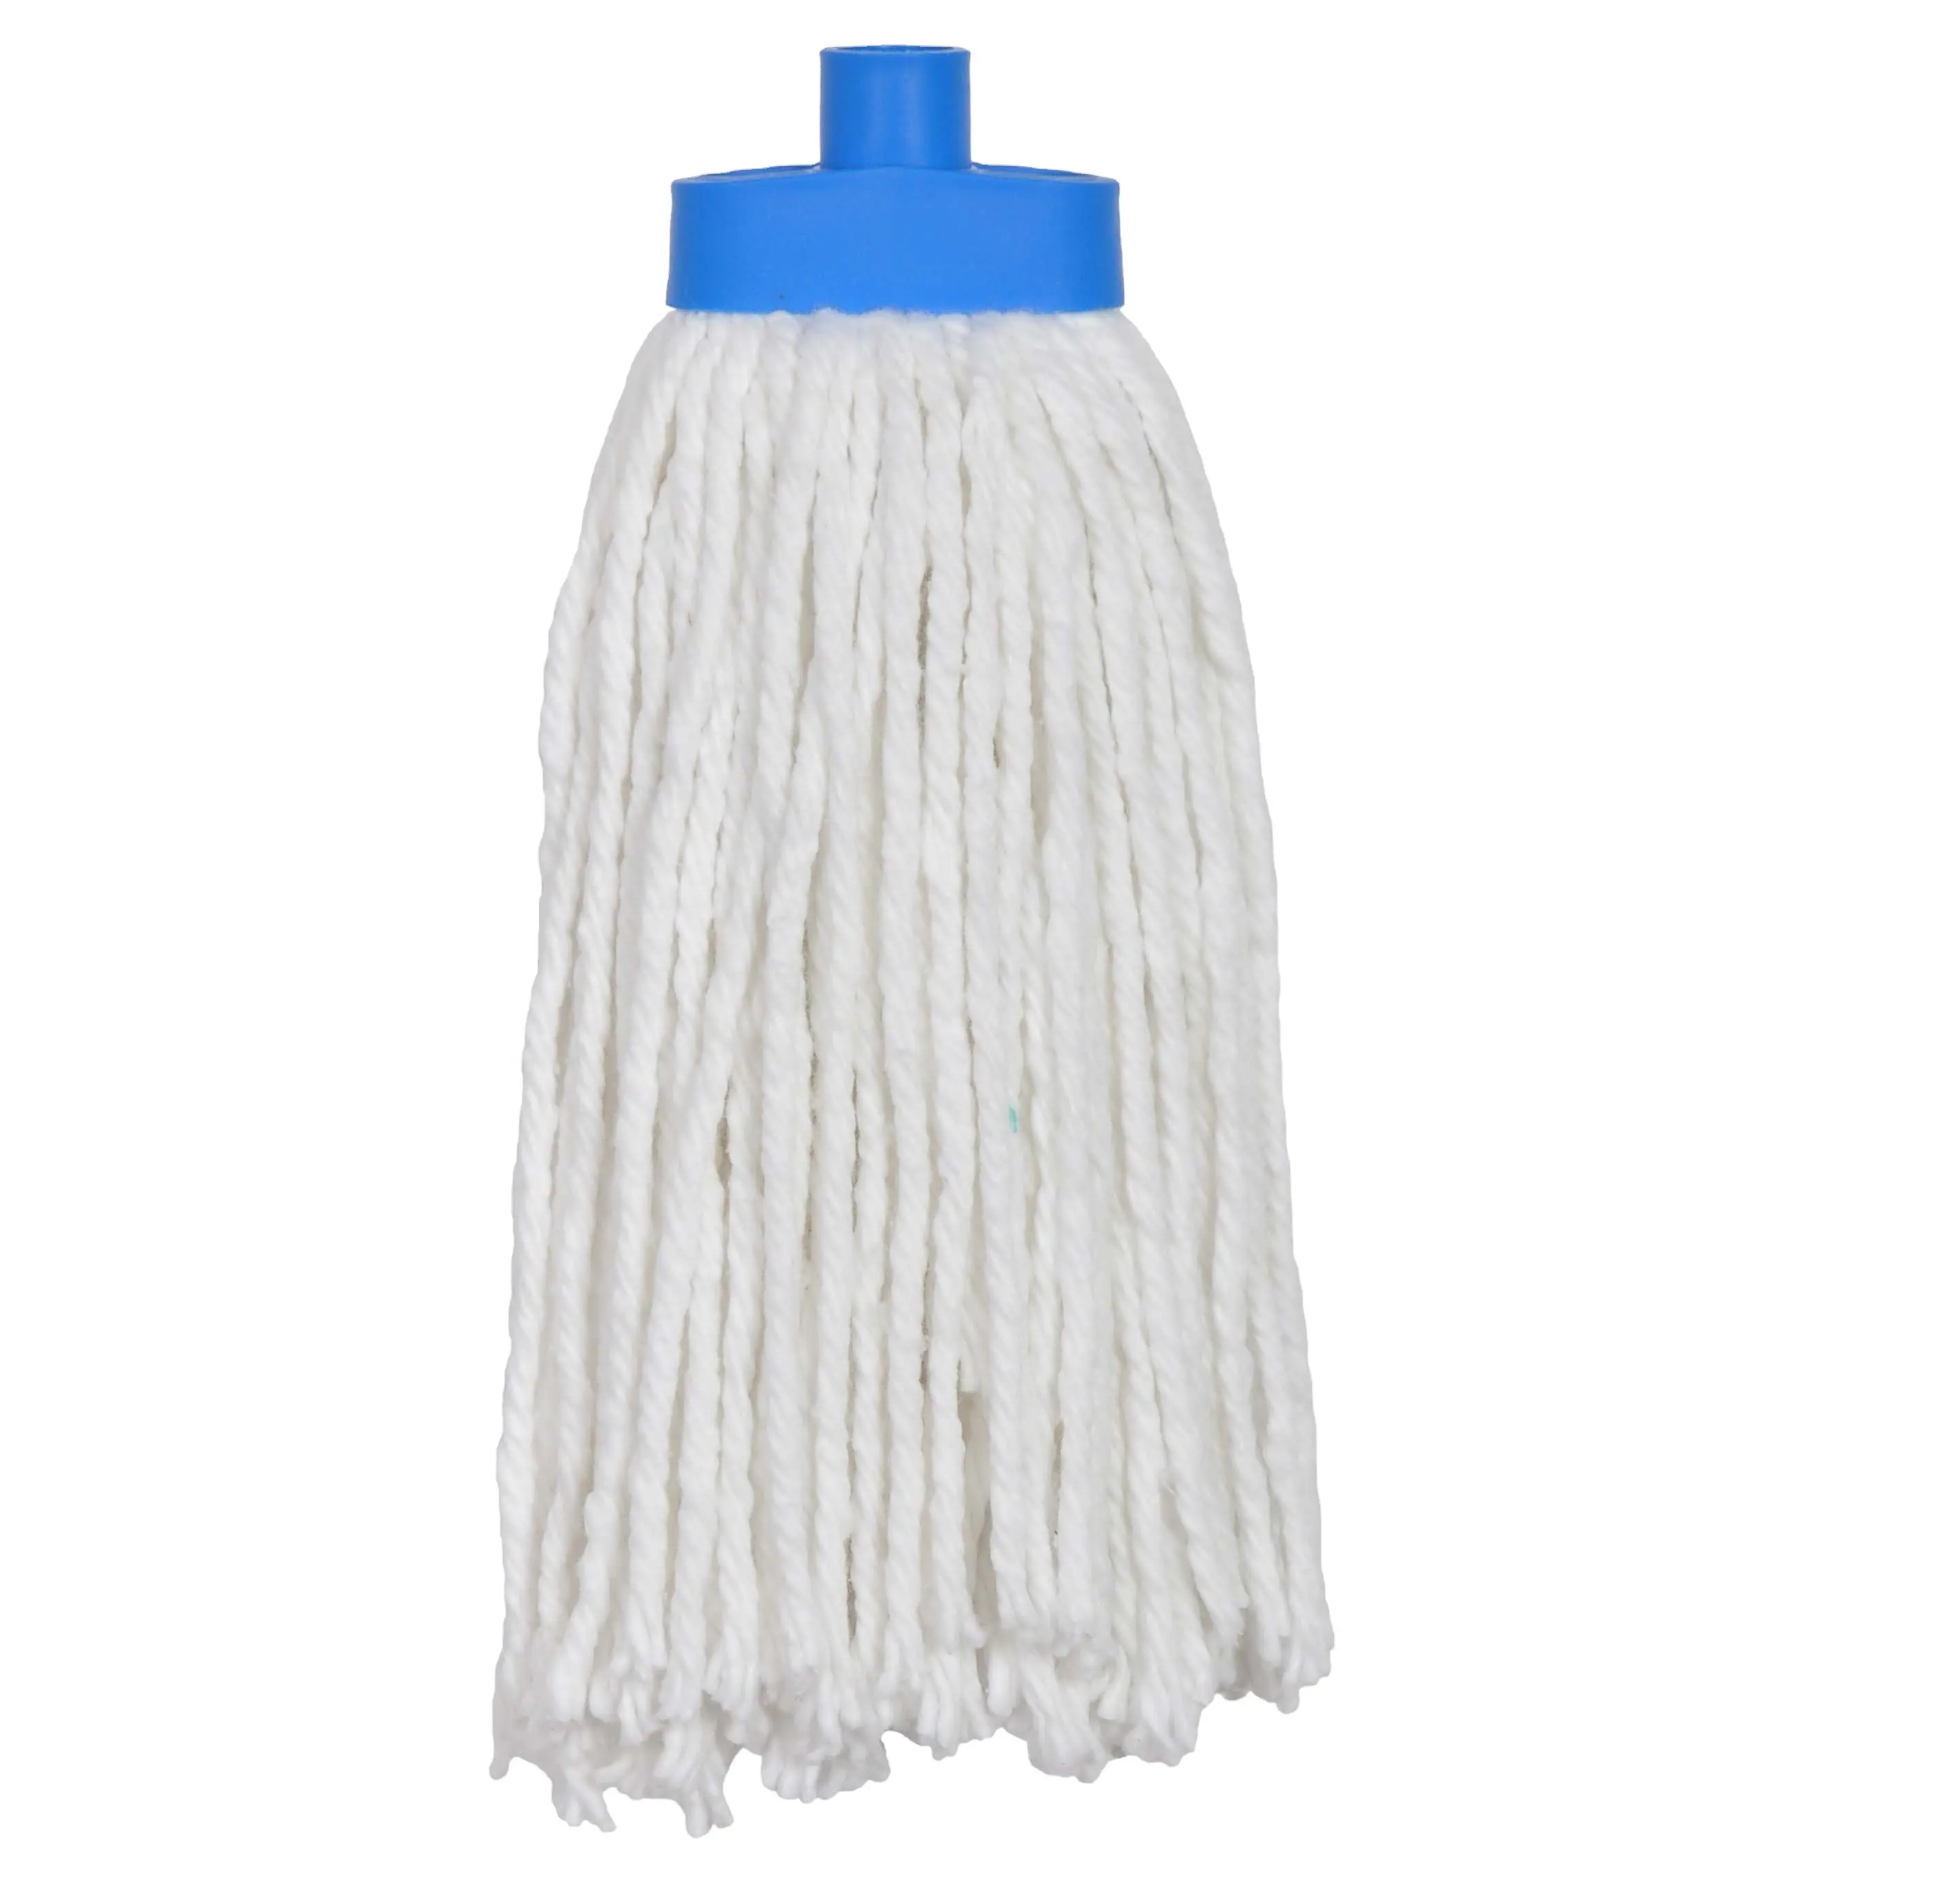 Xingtai Zhejiang recycled rotor spinning cotton plastic clip mop replacement